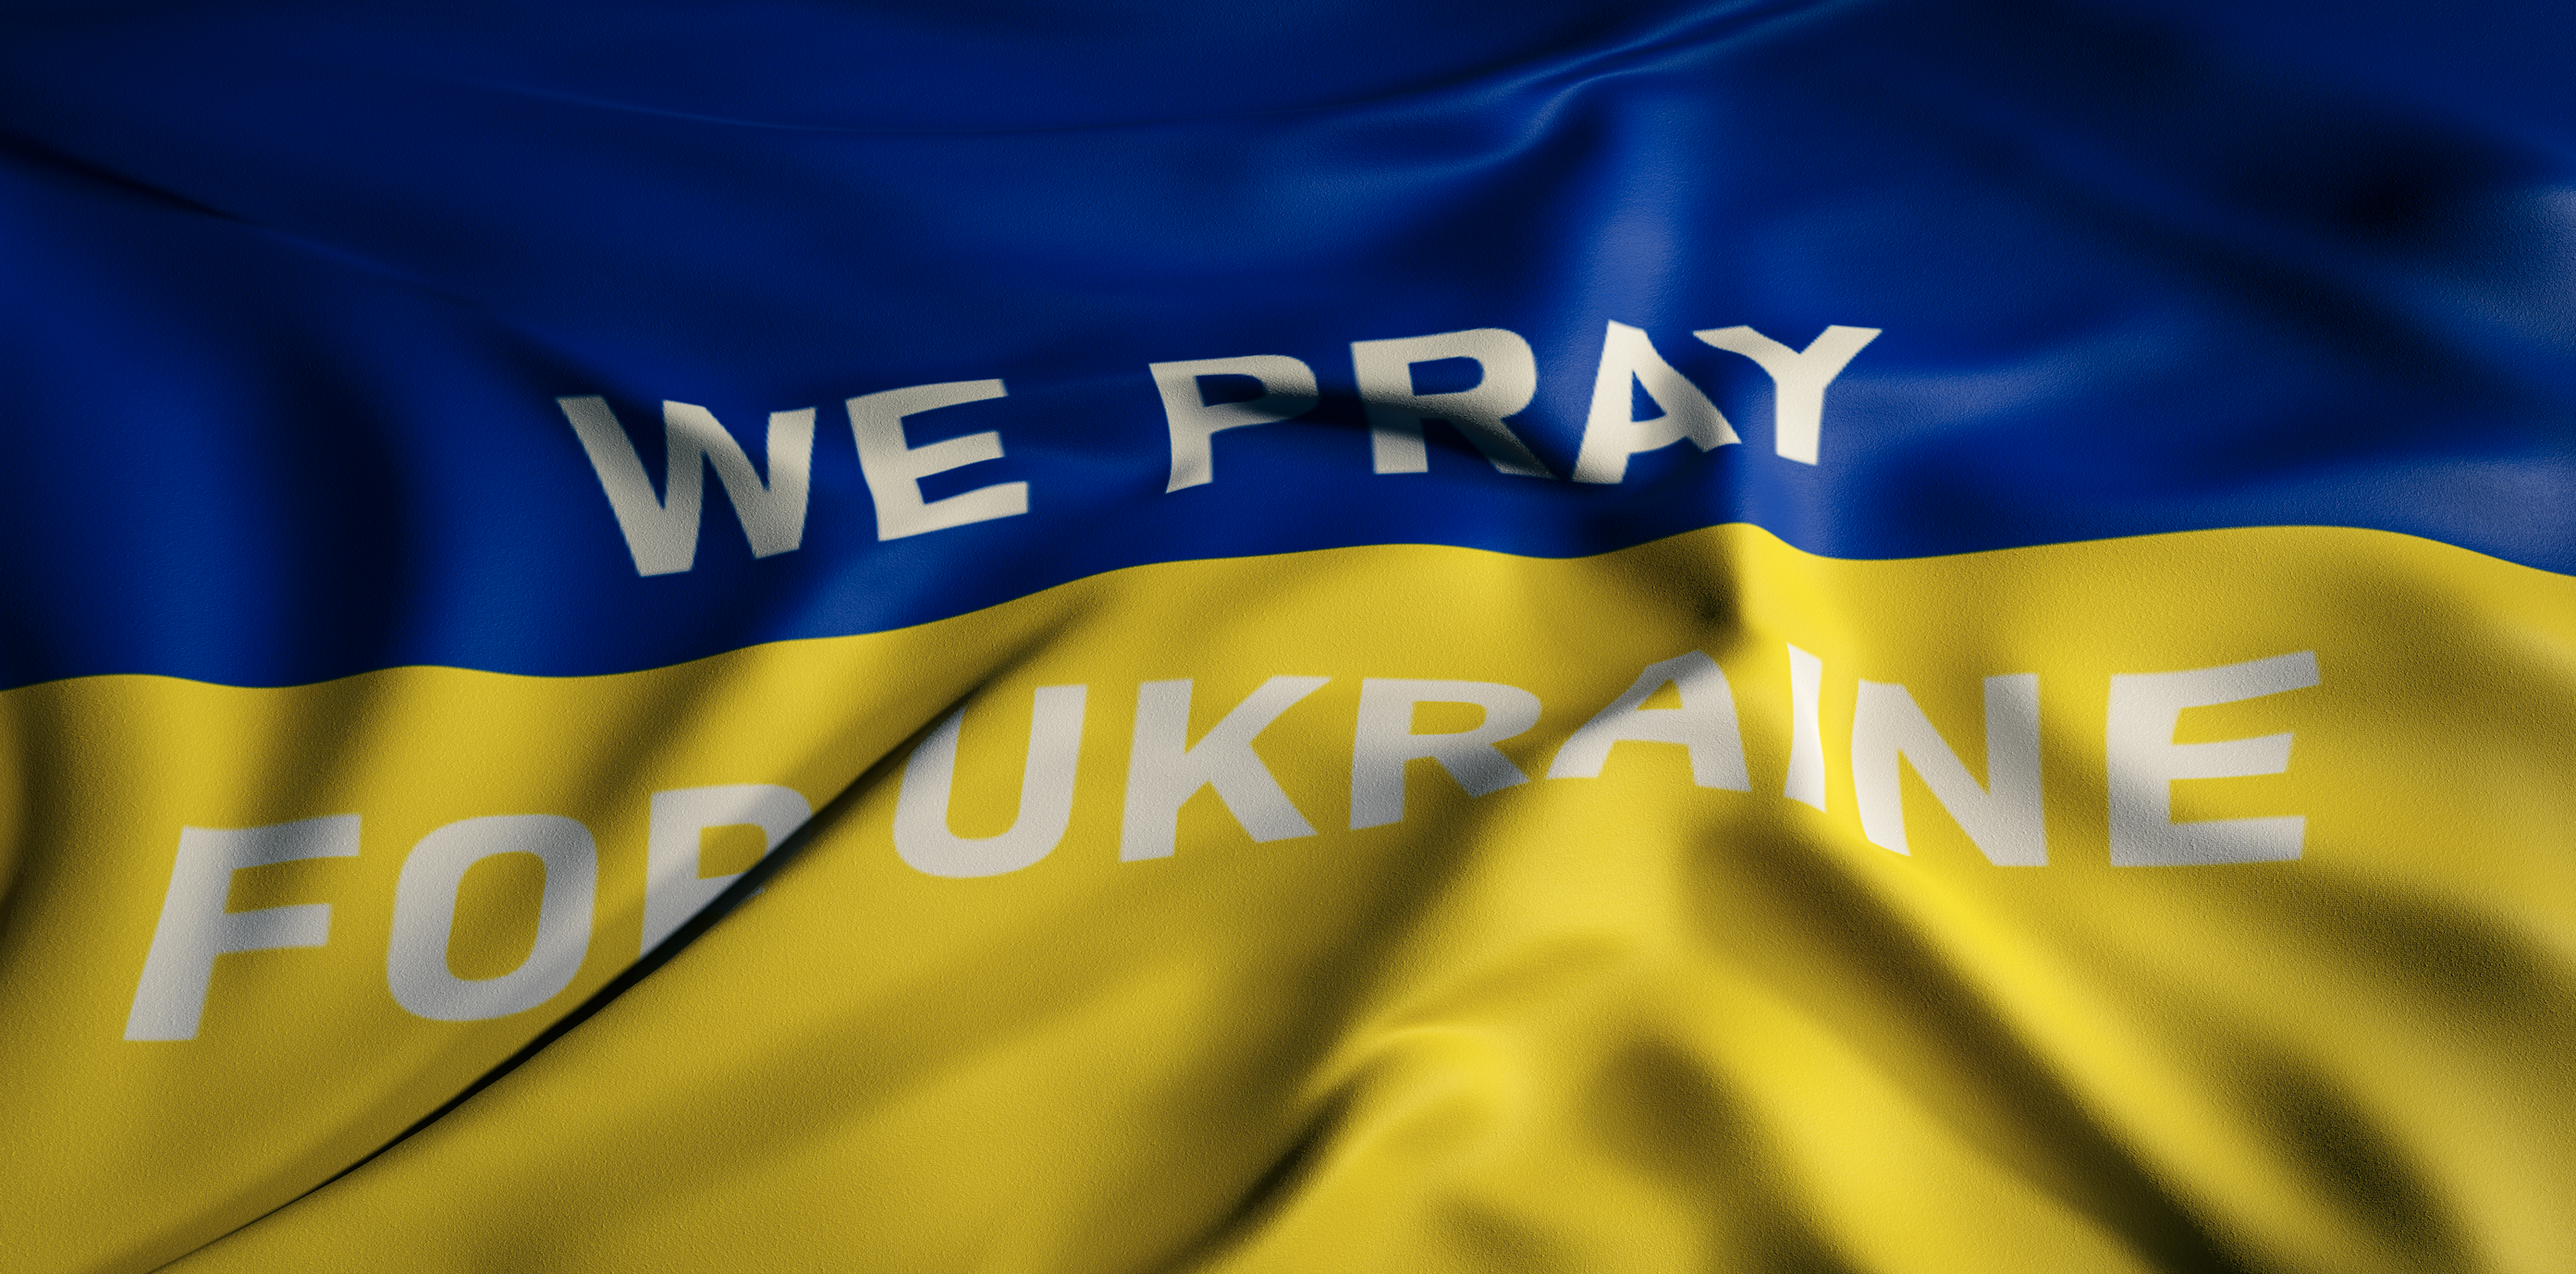 May God Bless the People of Ukraine 💪